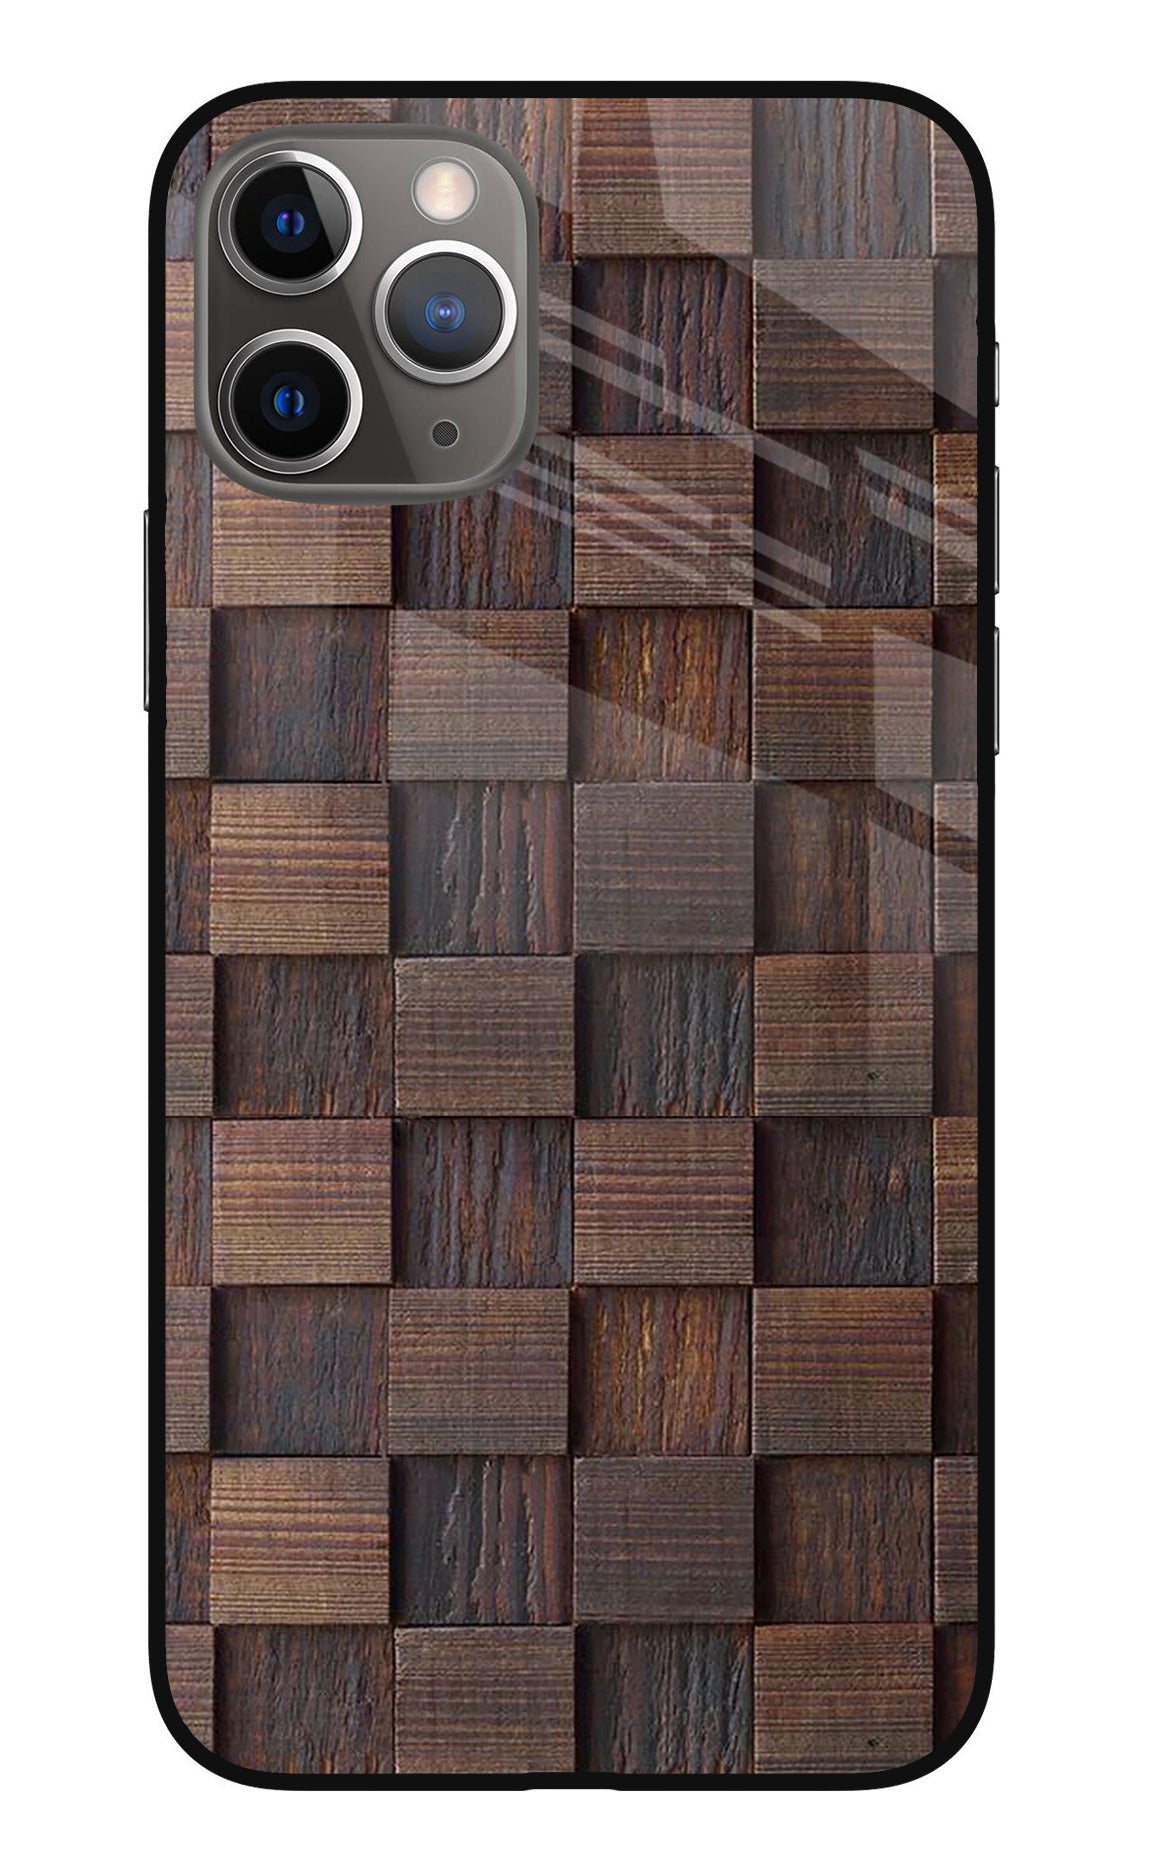 Wooden Cube Design iPhone 11 Pro Max Back Cover